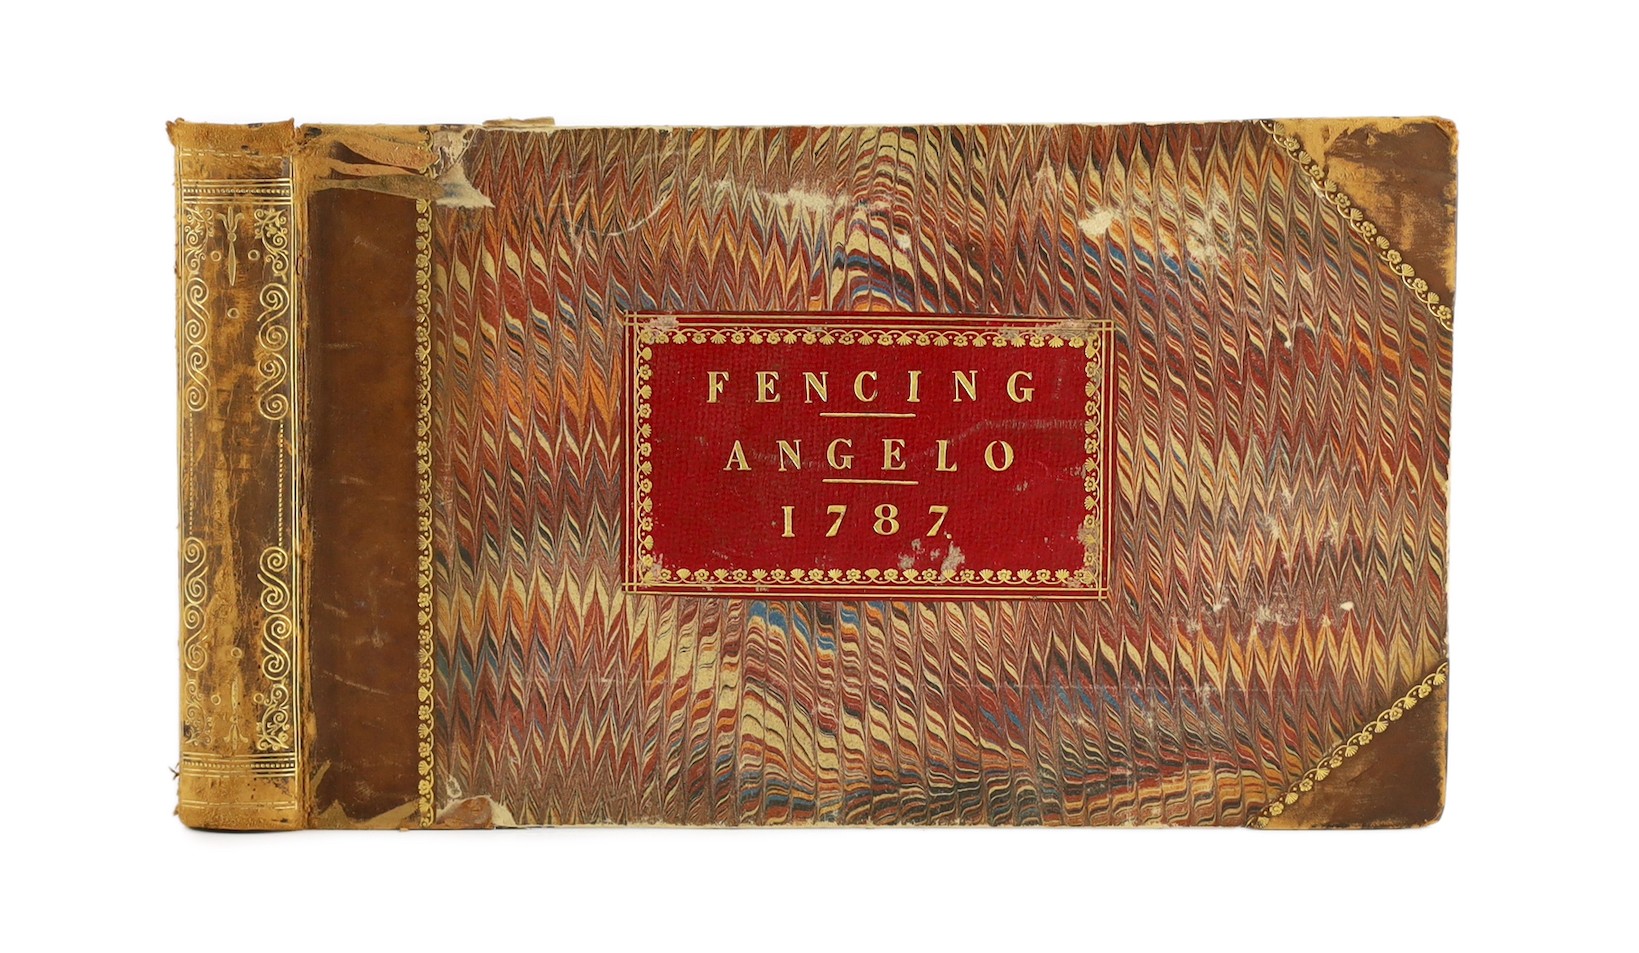 Angelo, Henry - The School of Fencing with ... the Principal Attitudes and Positions Peculiar to the Art. First edition.                                                                                                    